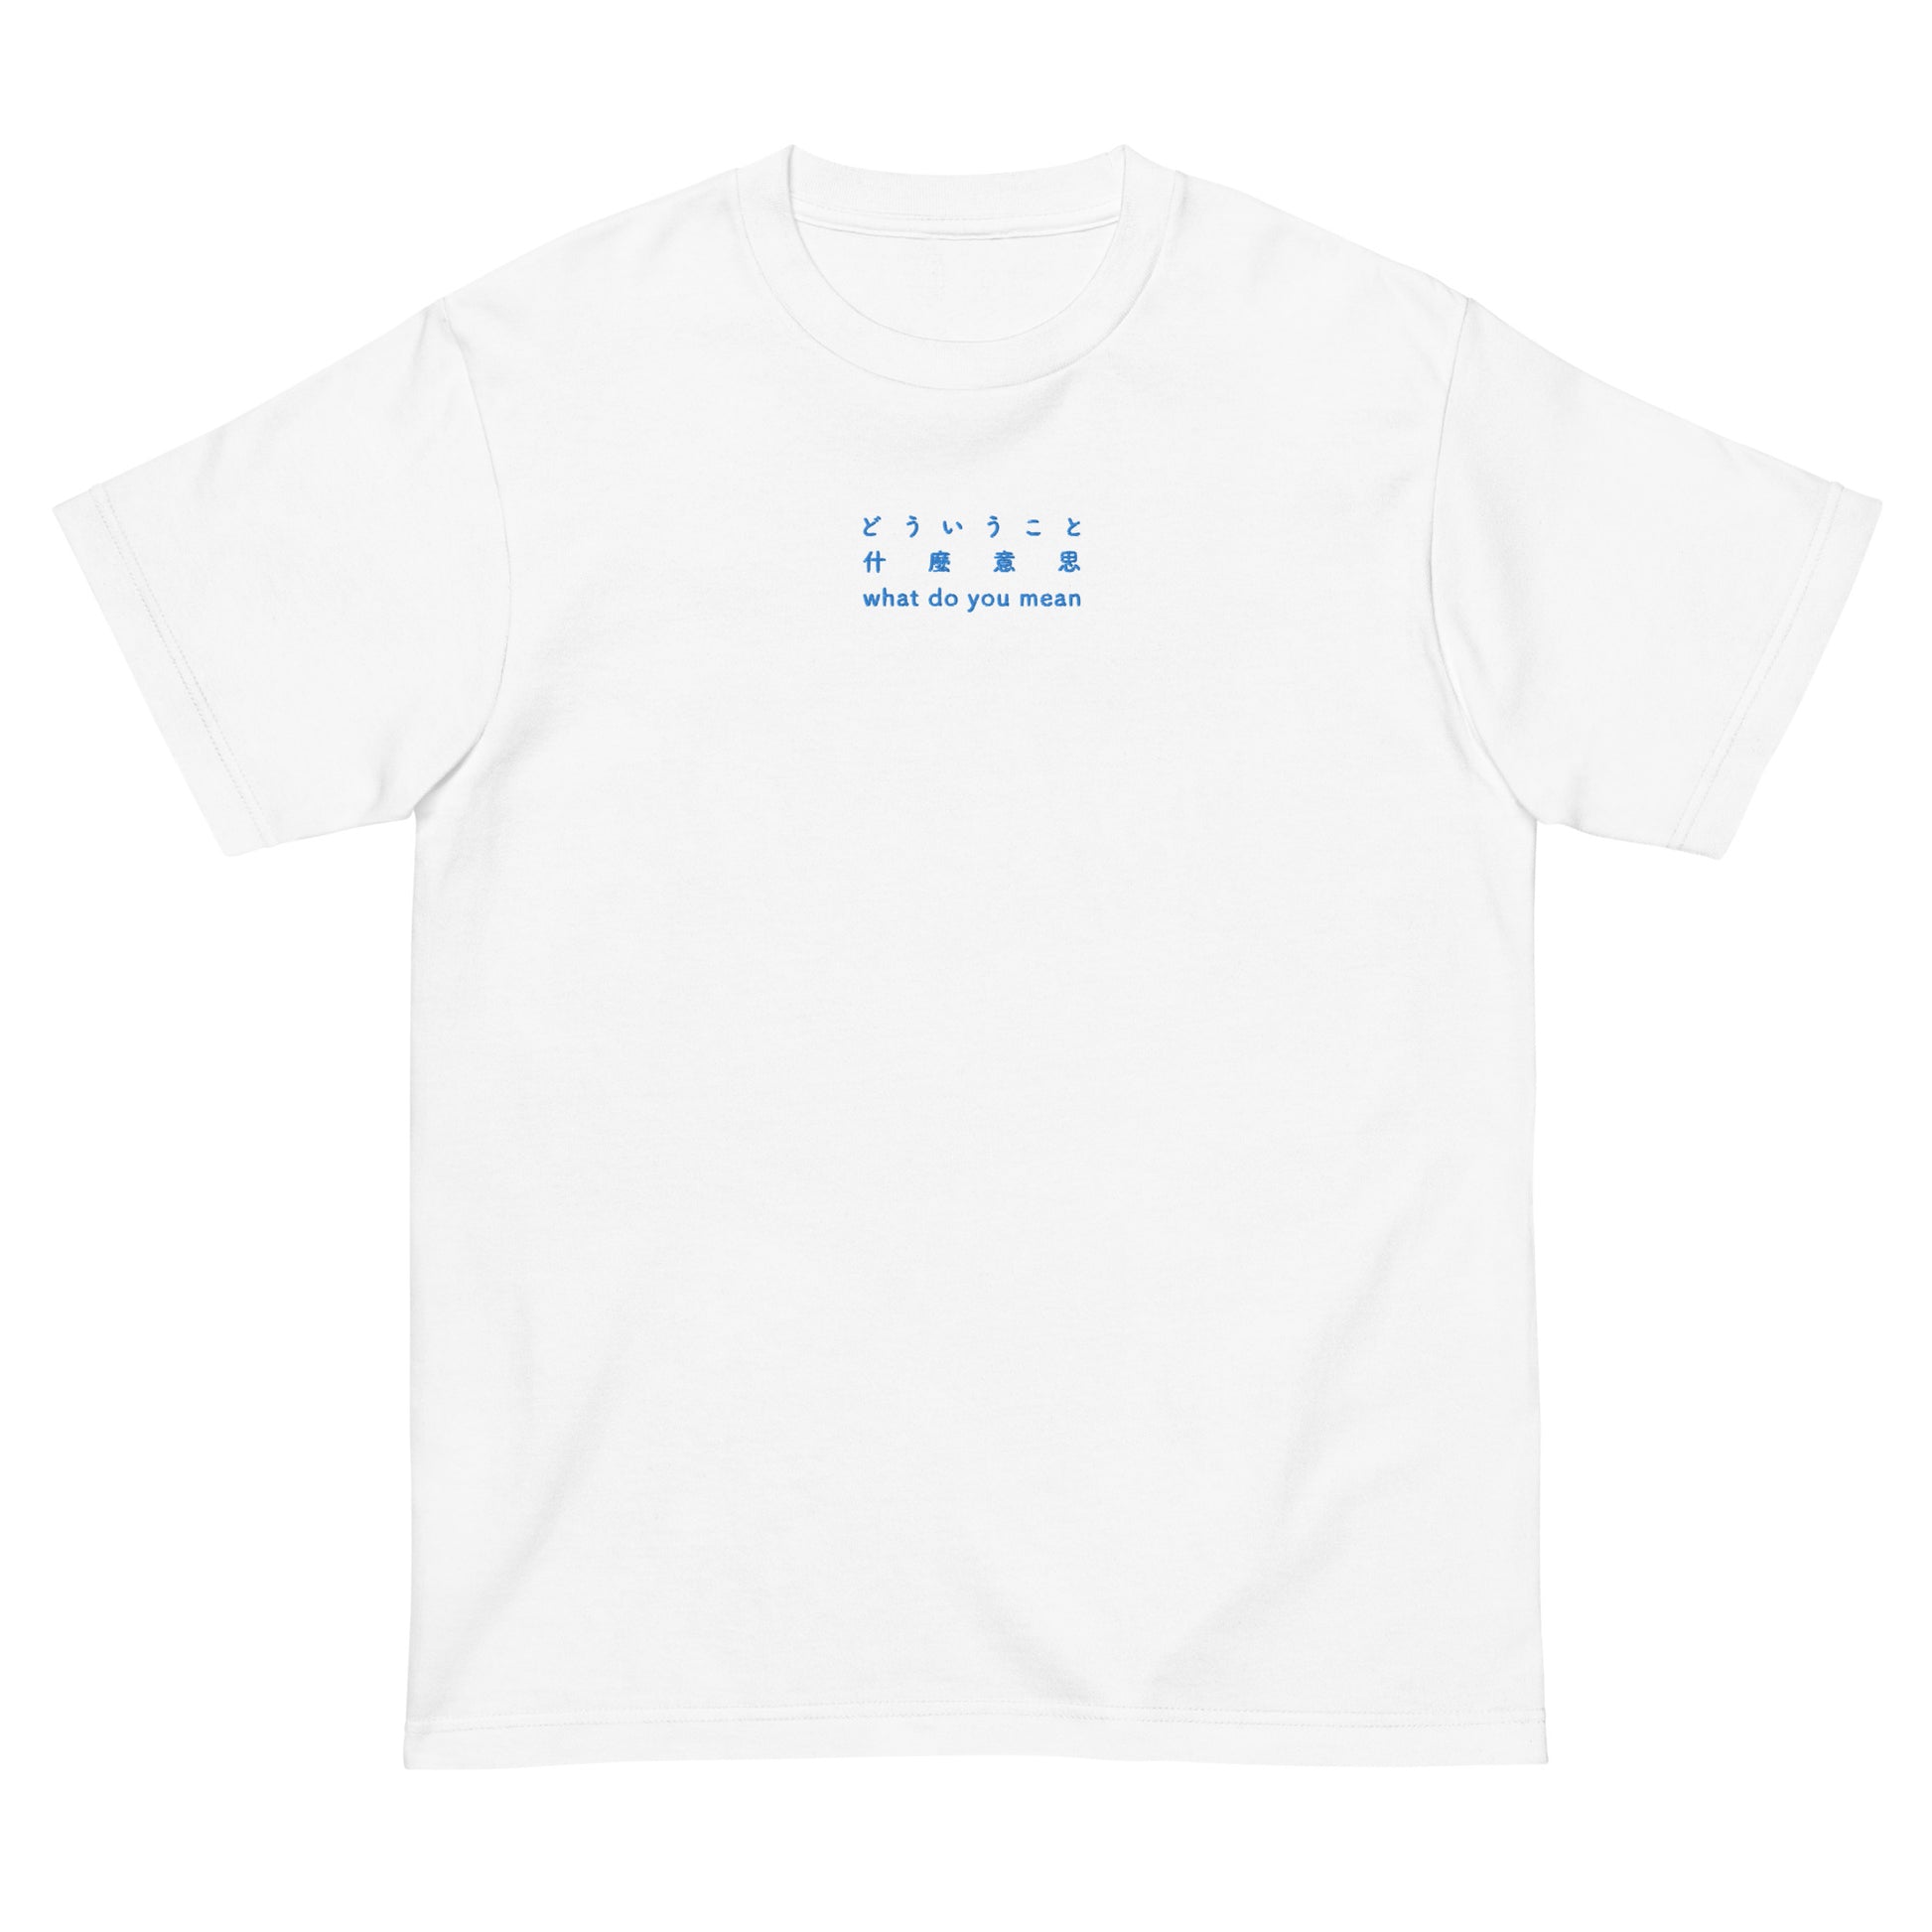 White High Quality Tee - Front Design with an Blue Embroidery "What Do You Mean" in Japanese, Chinese and English